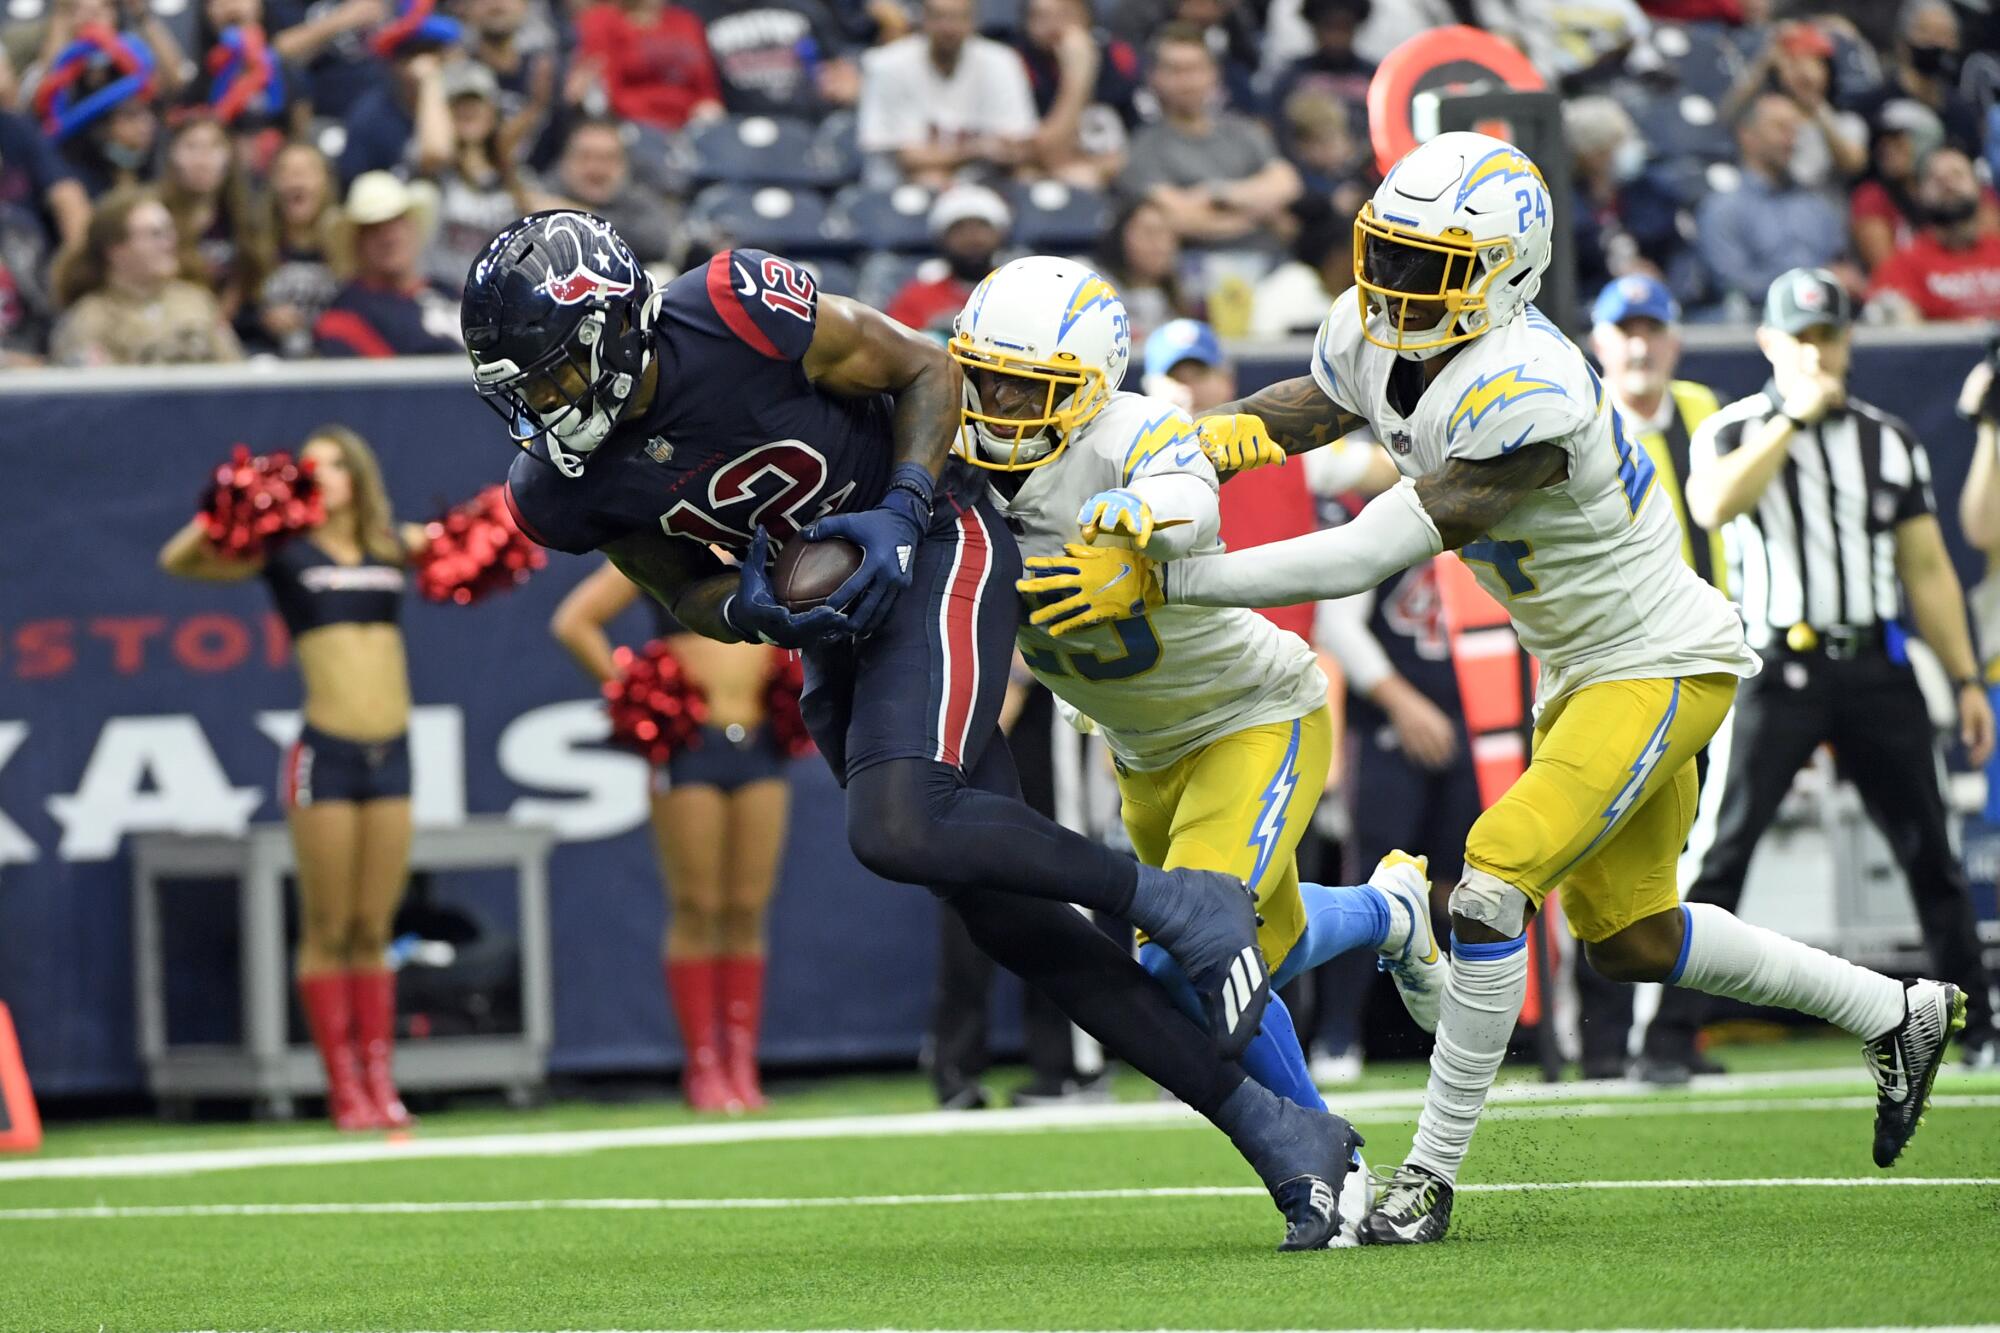 Houston Texans wide receiver Nico Collins catches a pass for a touchdown in front of Chargers defensive backs.